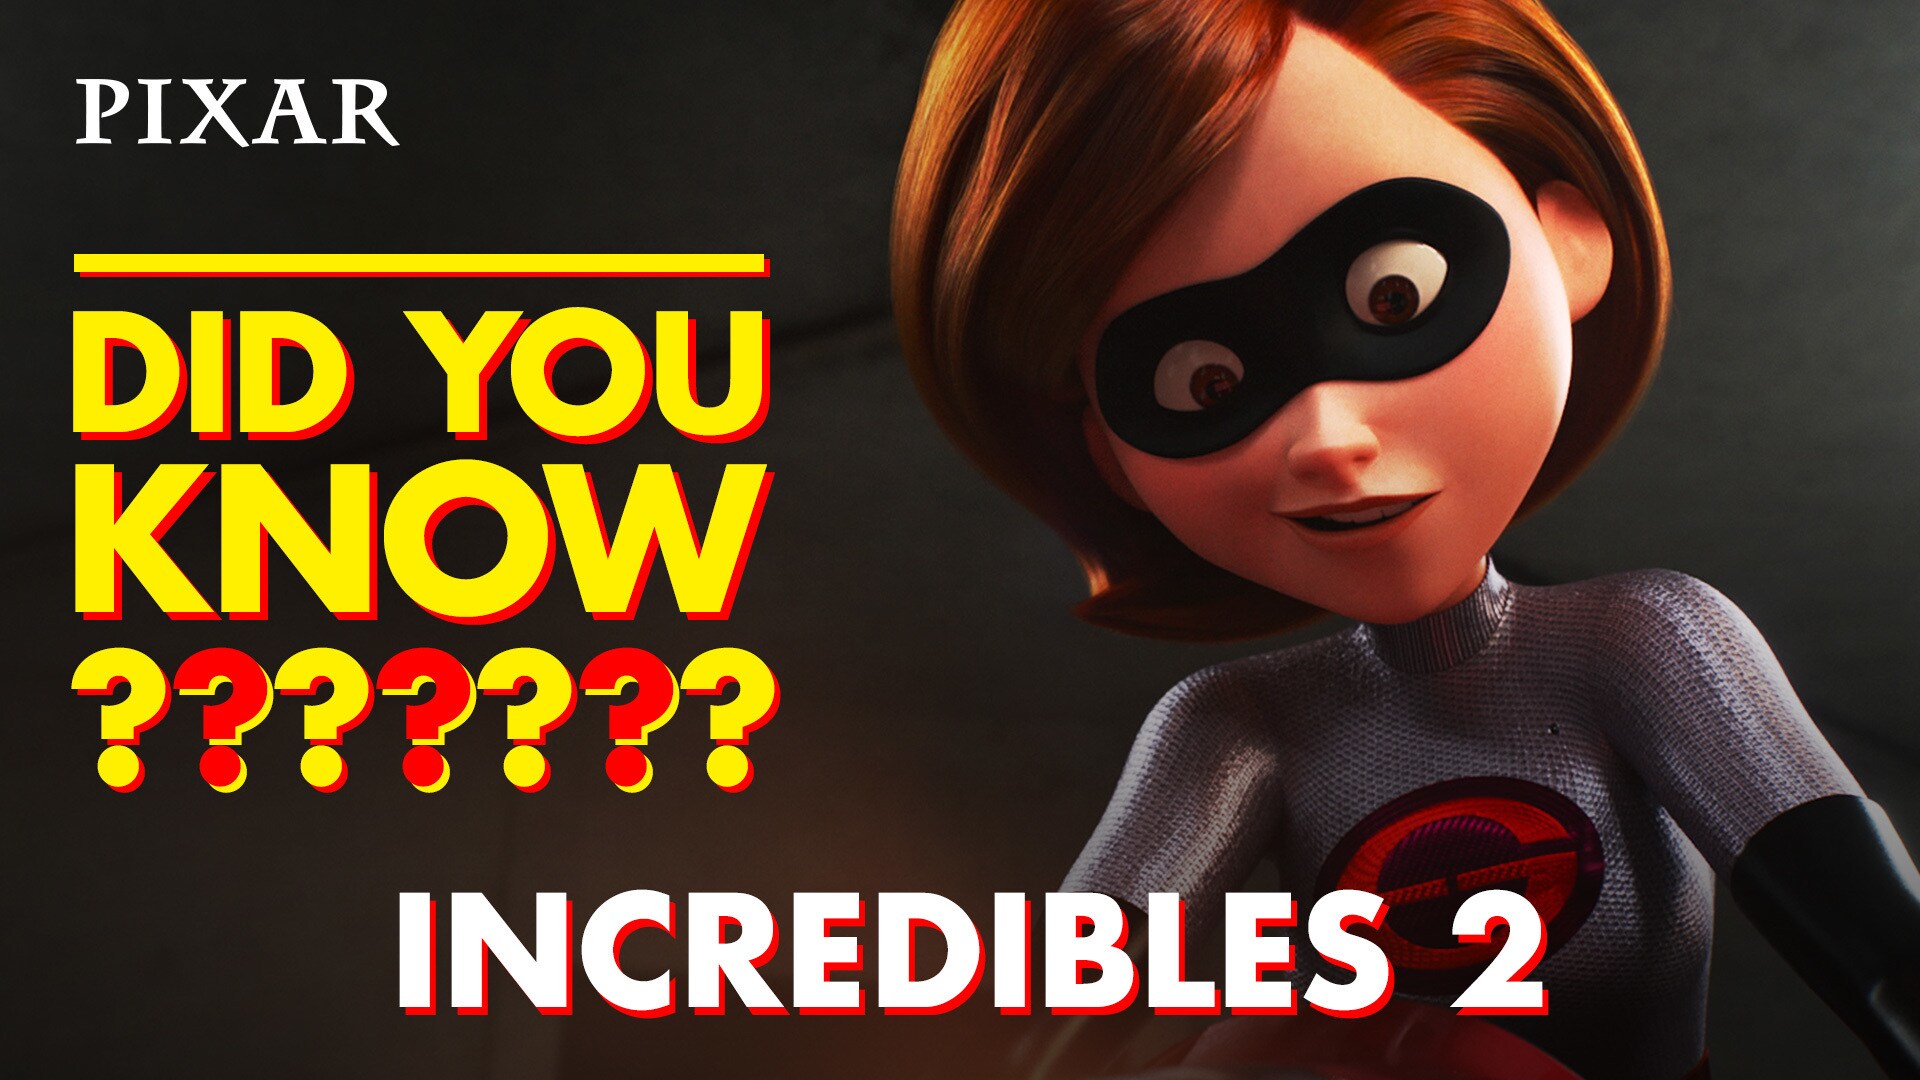 Did You Know That In THE INCREDIBLES 